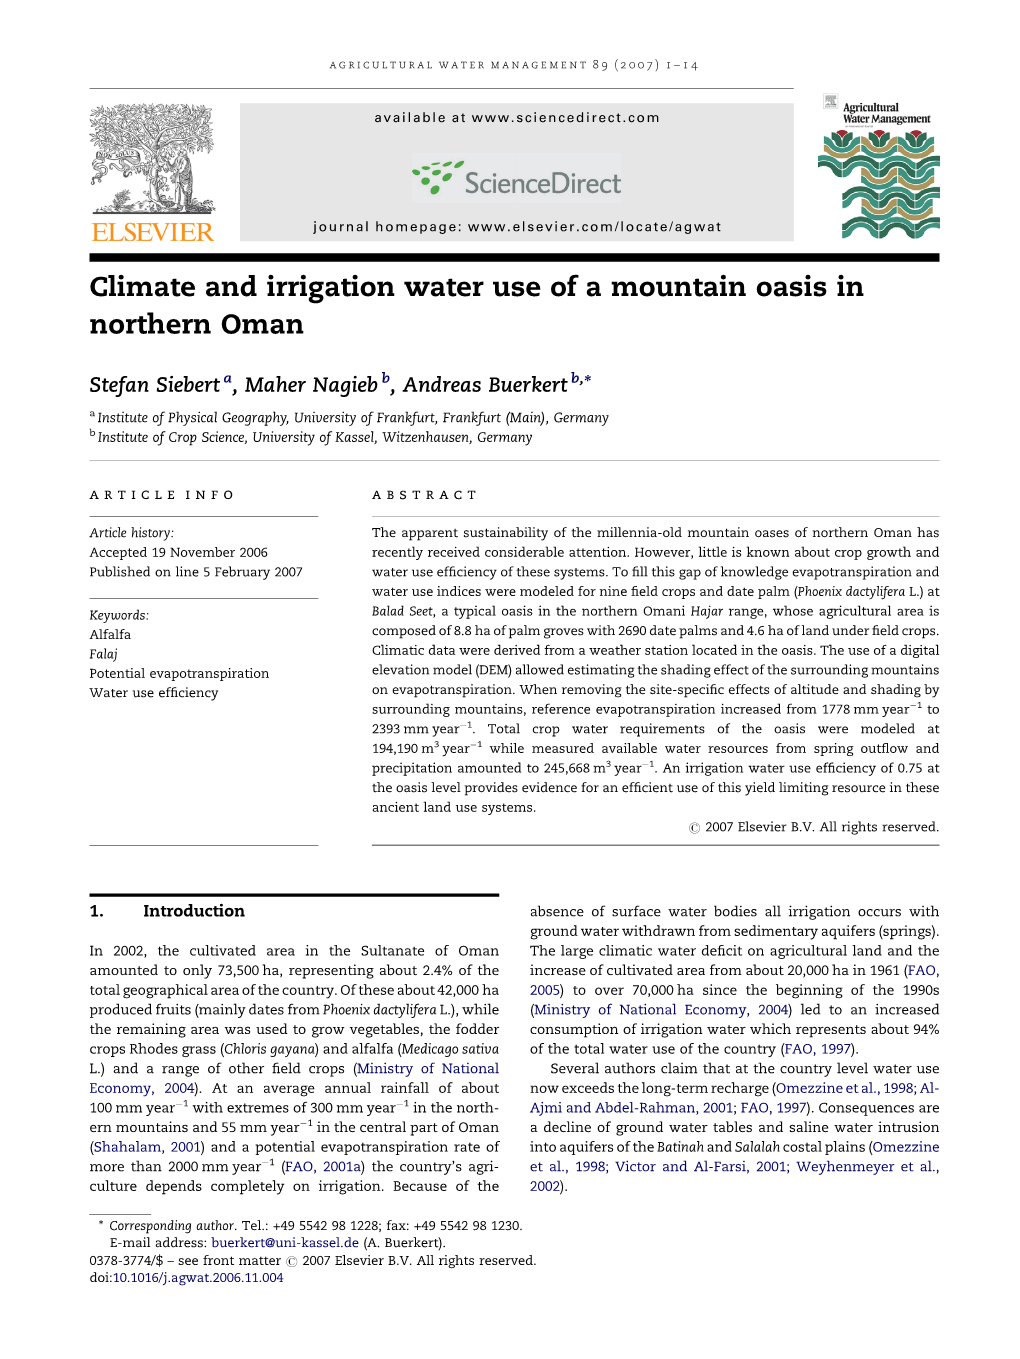 Climate and Irrigation Water Use of a Mountain Oasis in Northern Oman